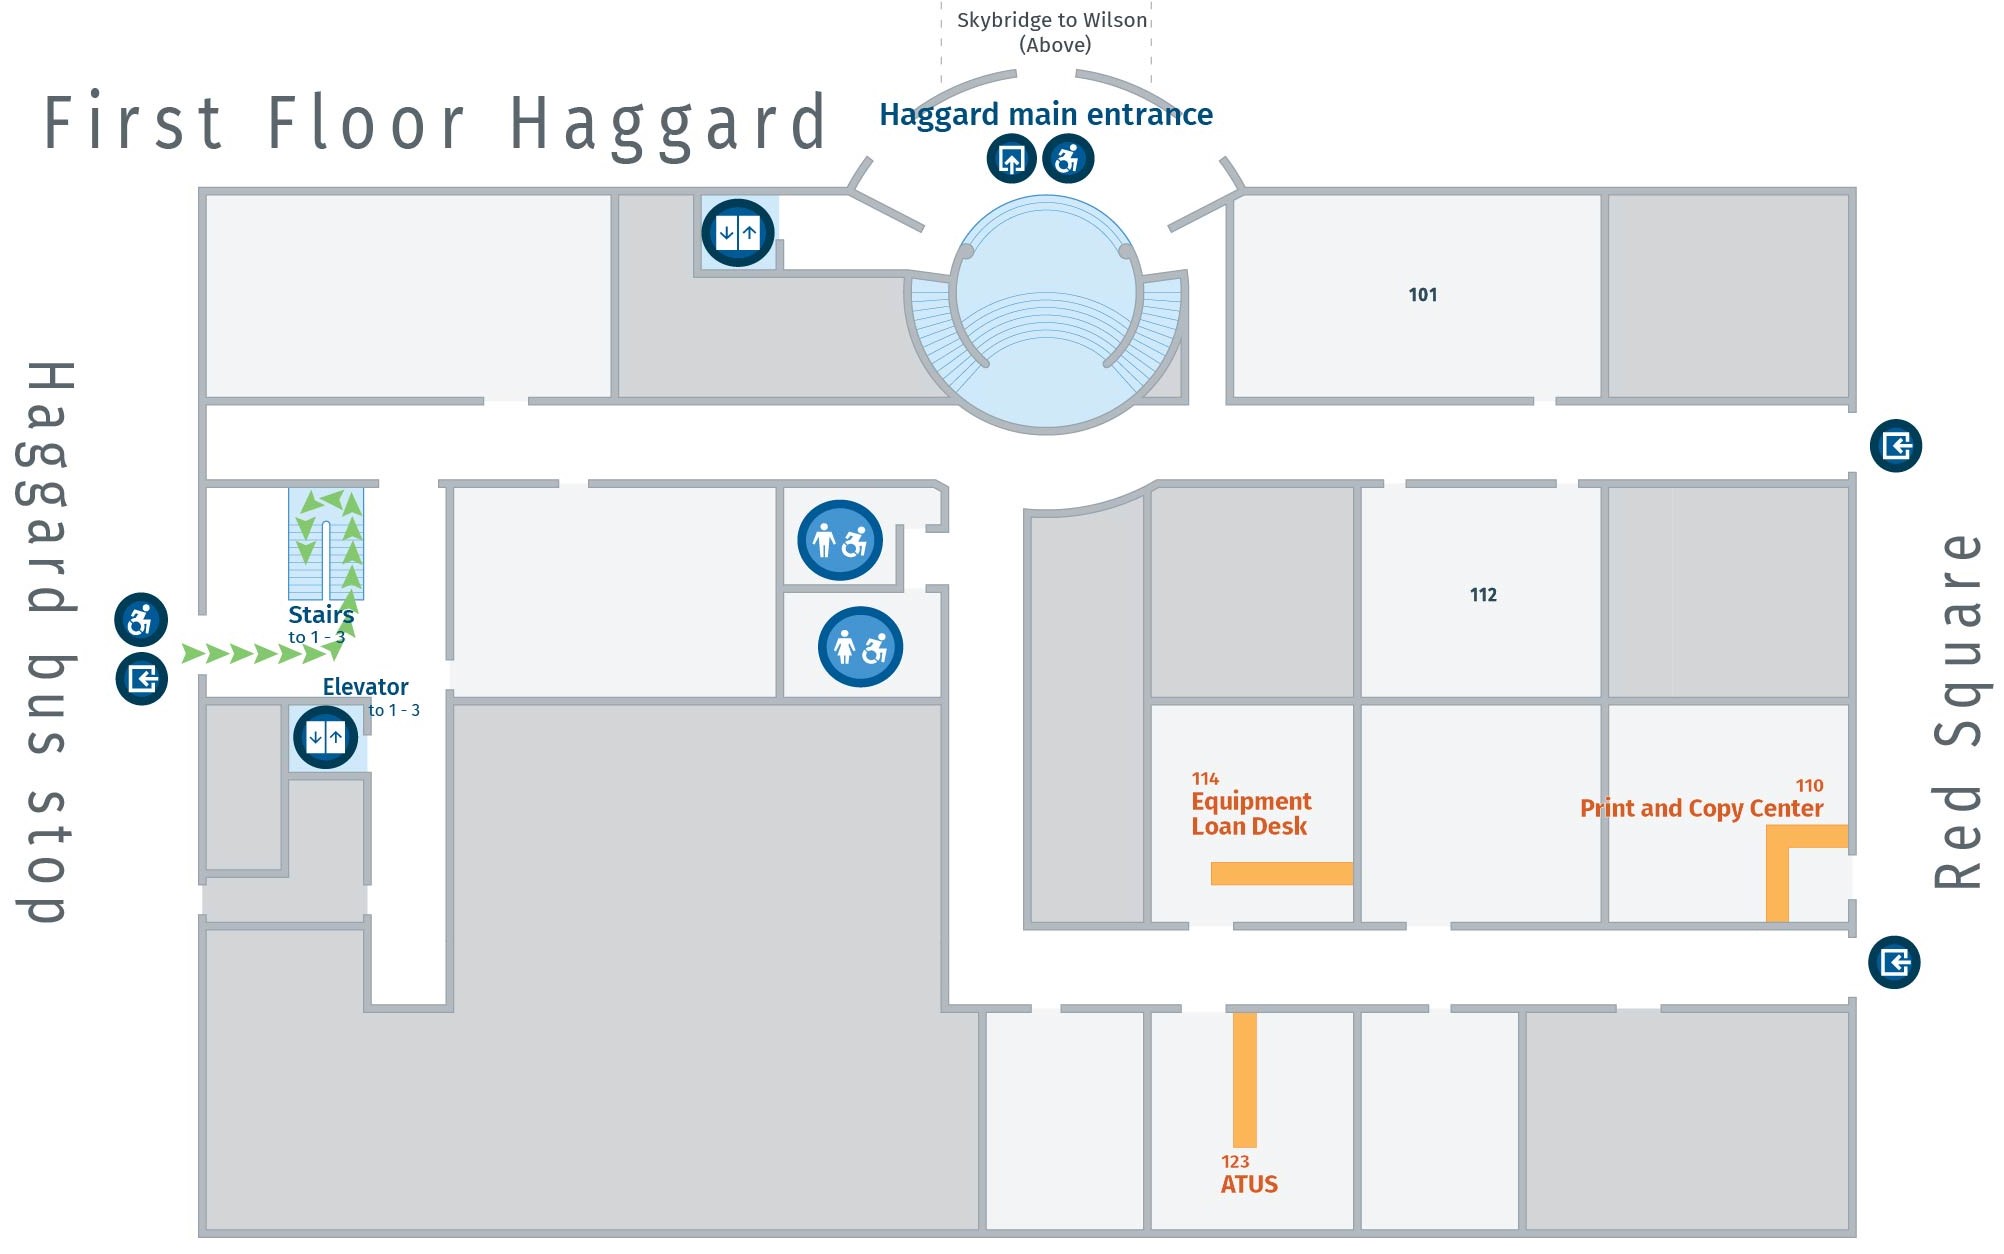 Floor plan, first floor of Haggard with path to HH stairway.